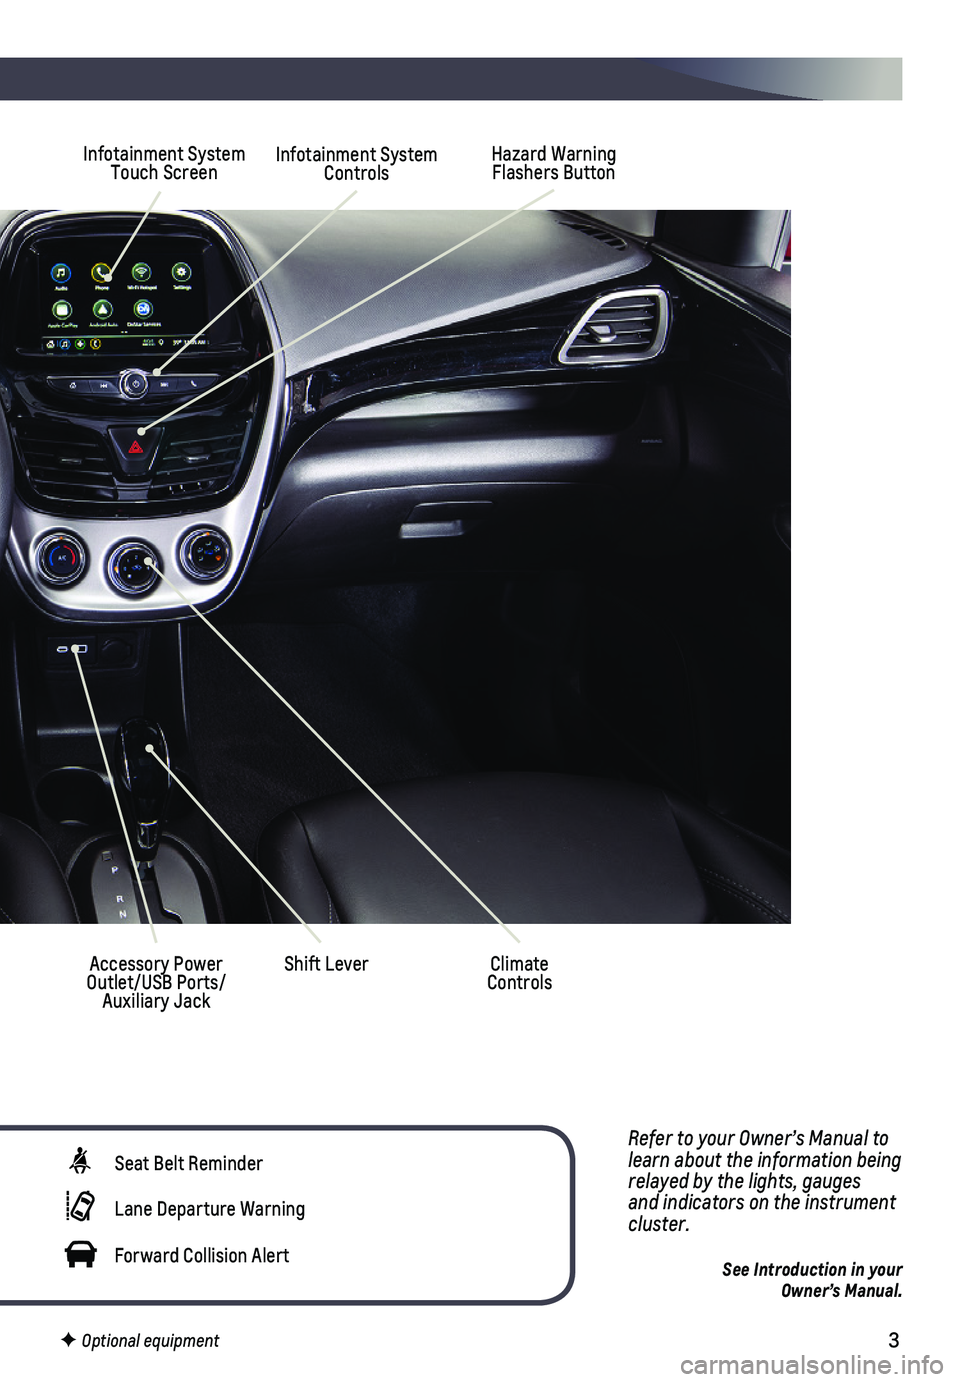 CHEVROLET SPARK 2020  Get To Know Guide 3
Refer to your Owner’s Manual to learn about the information being relayed by the lights, gauges and indicators on the instrument cluster.
See Introduction in your  Owner’s Manual.
Hazard Warning